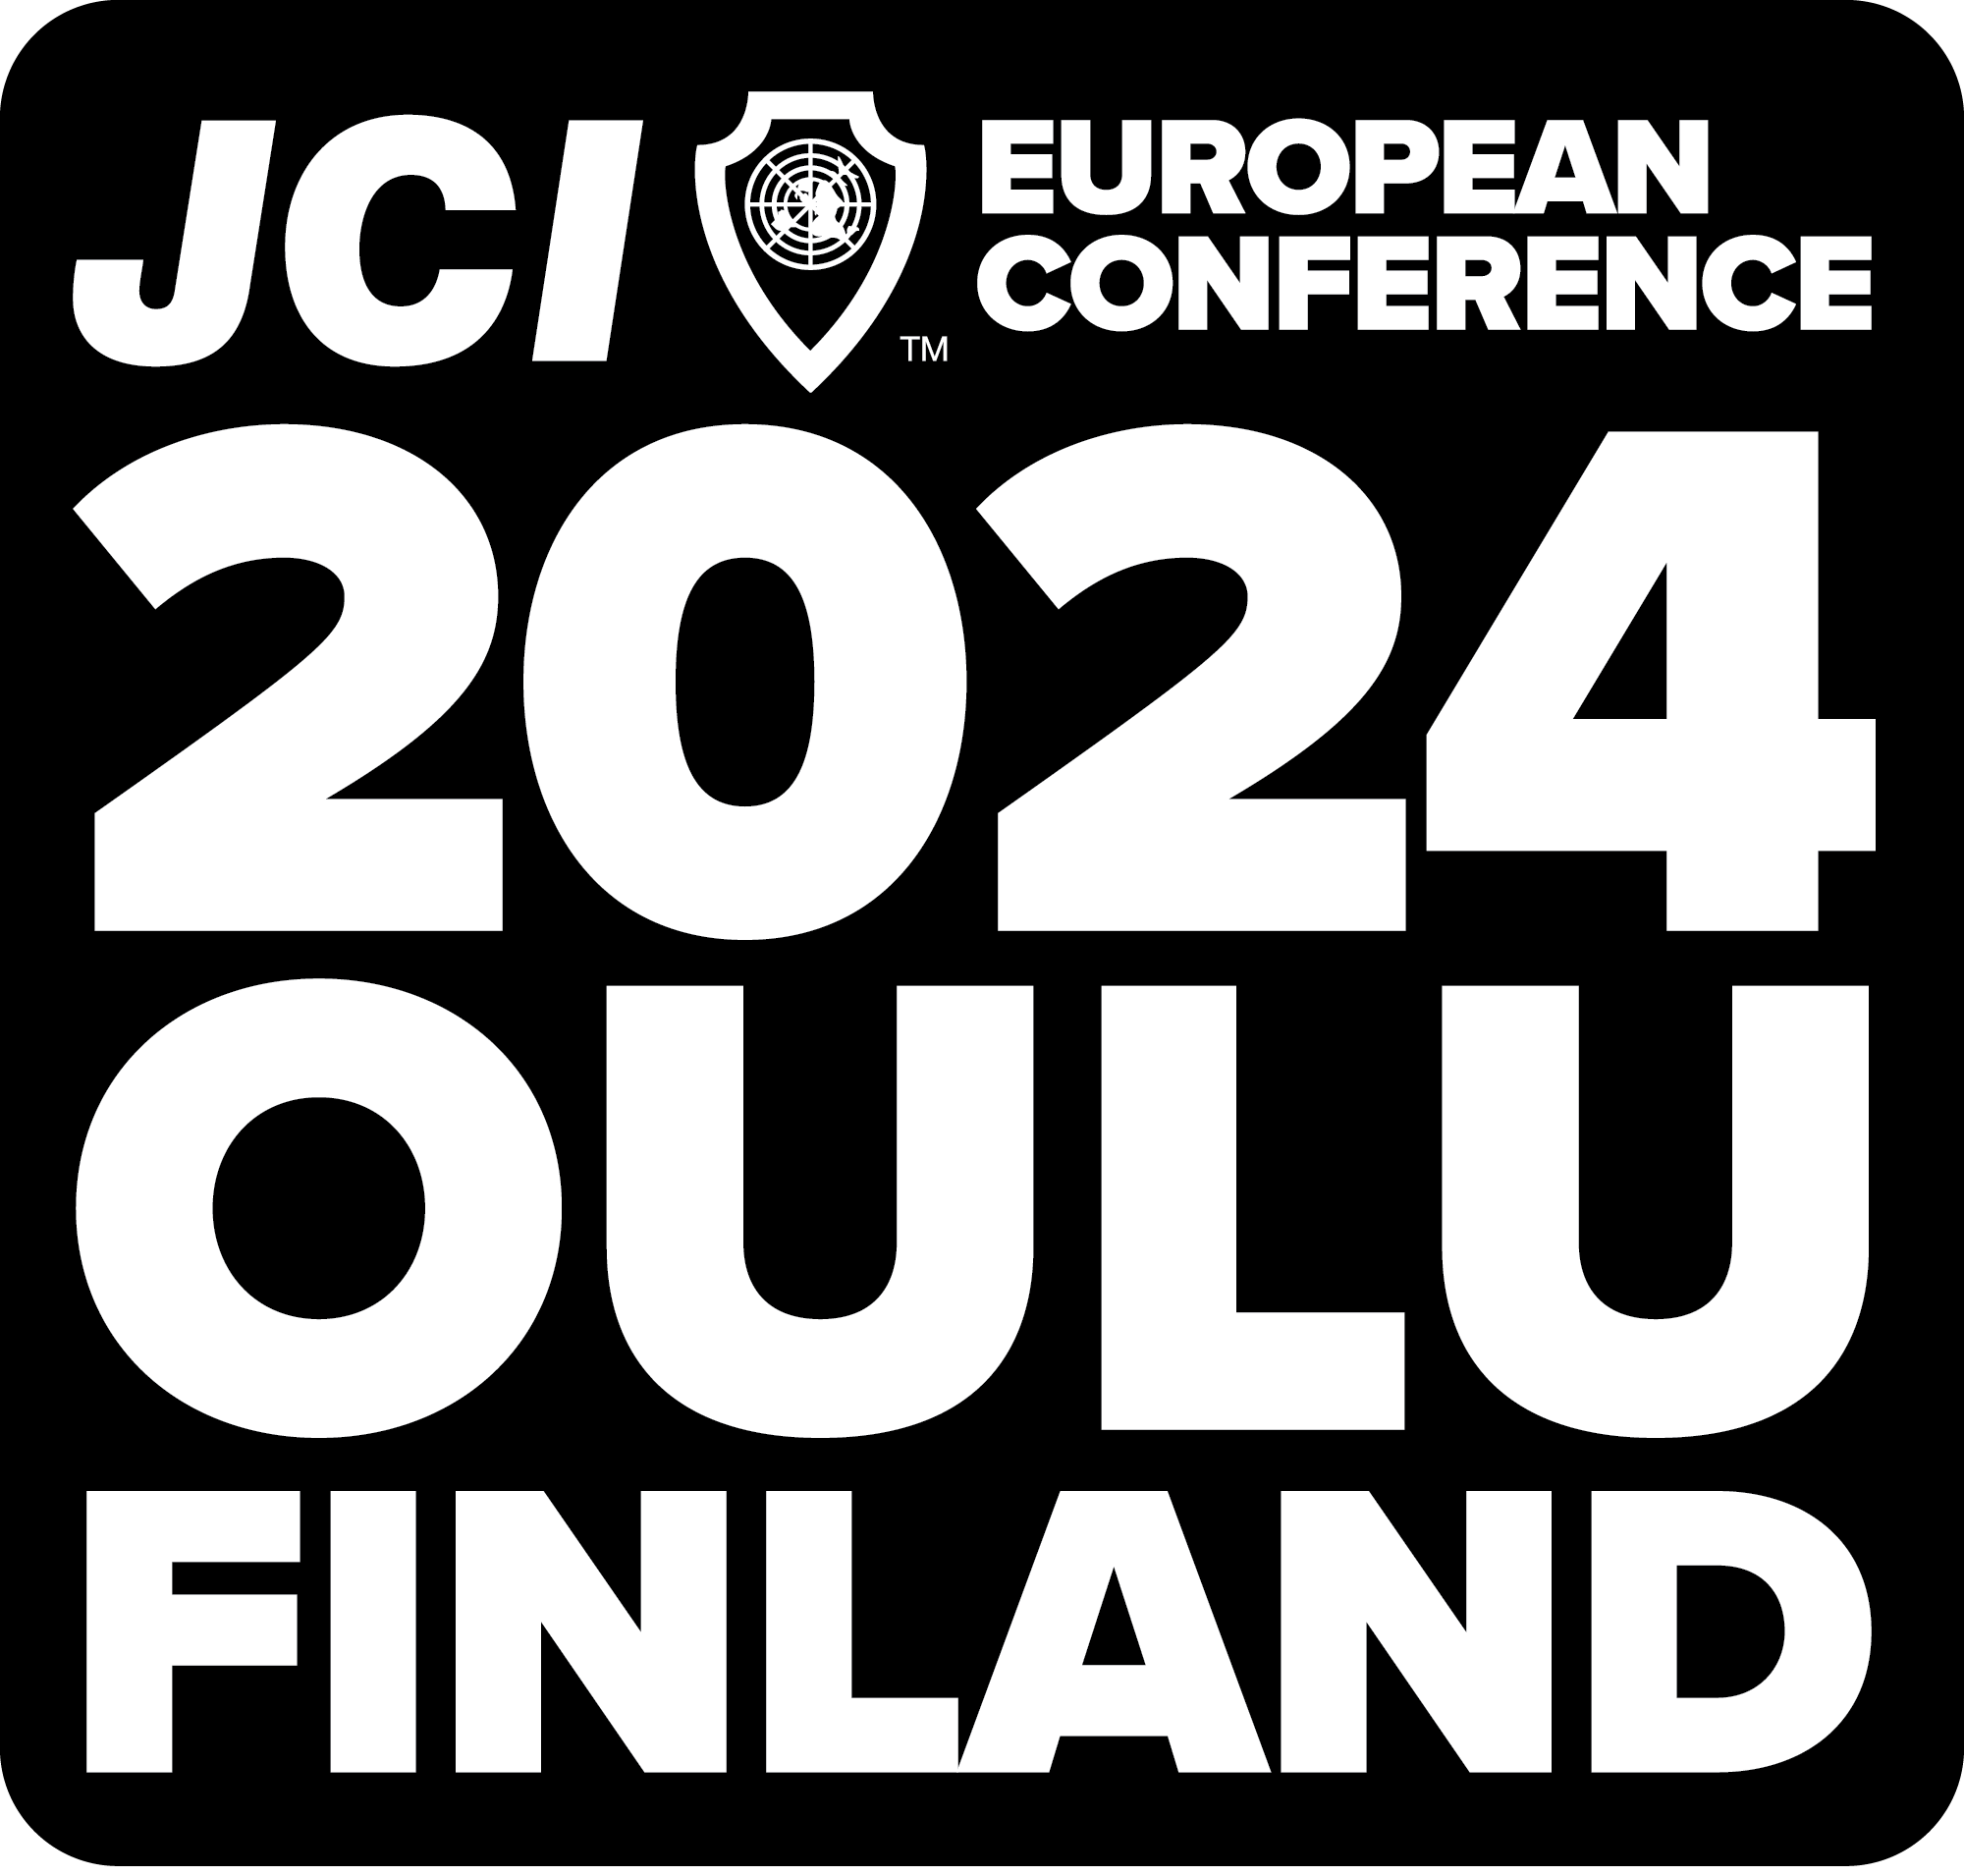 European Conference 2024